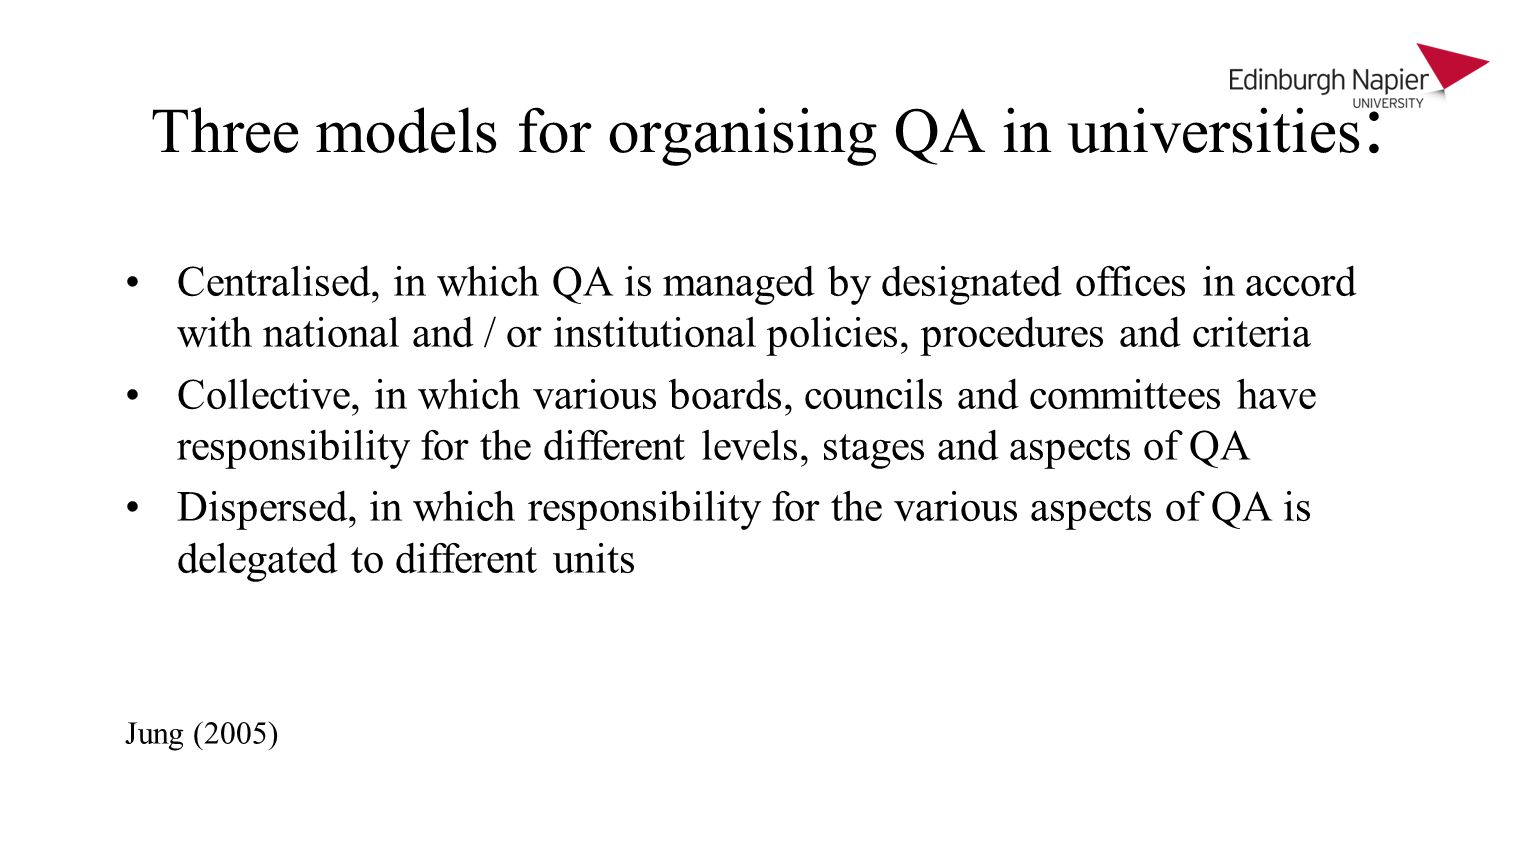 Three models for organising QA in universities : Centralised, in which QA is managed by designated offices in accord with national and / or institutional policies, procedures and criteria Collective, in which various boards, councils and committees have responsibility for the different levels, stages and aspects of QA Dispersed, in which responsibility for the various aspects of QA is delegated to different units Jung (2005)